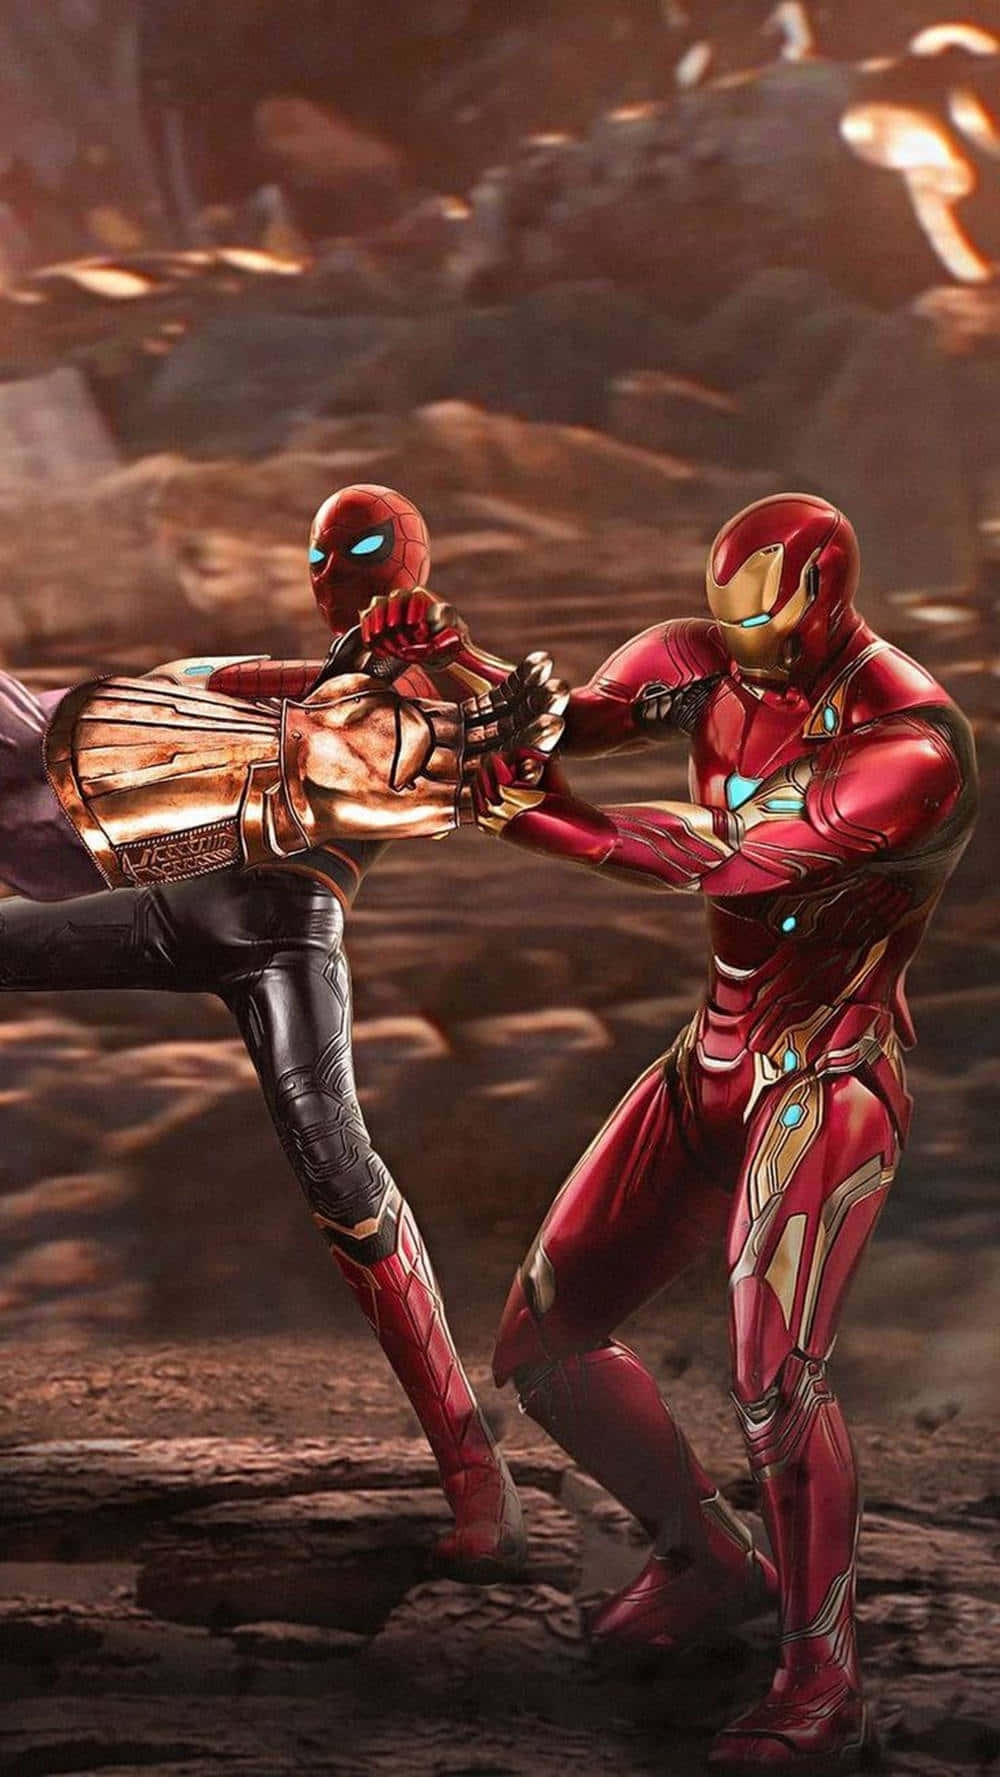 Spider Man and Iron Man join forces to protect the world Wallpaper